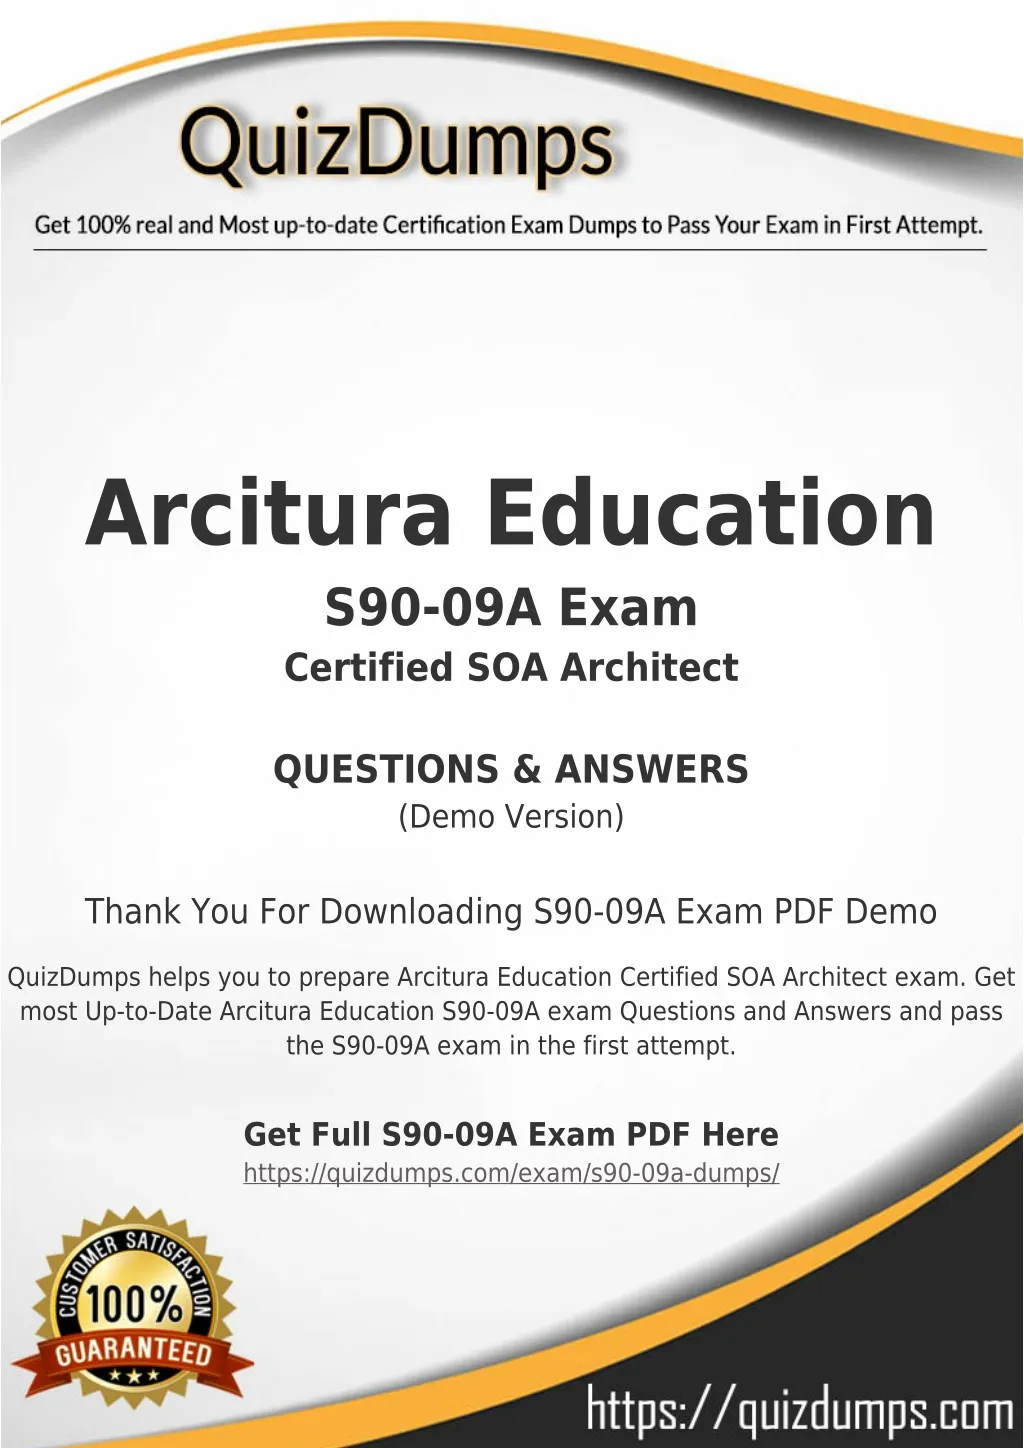 arcitura education s90 09a exam certified